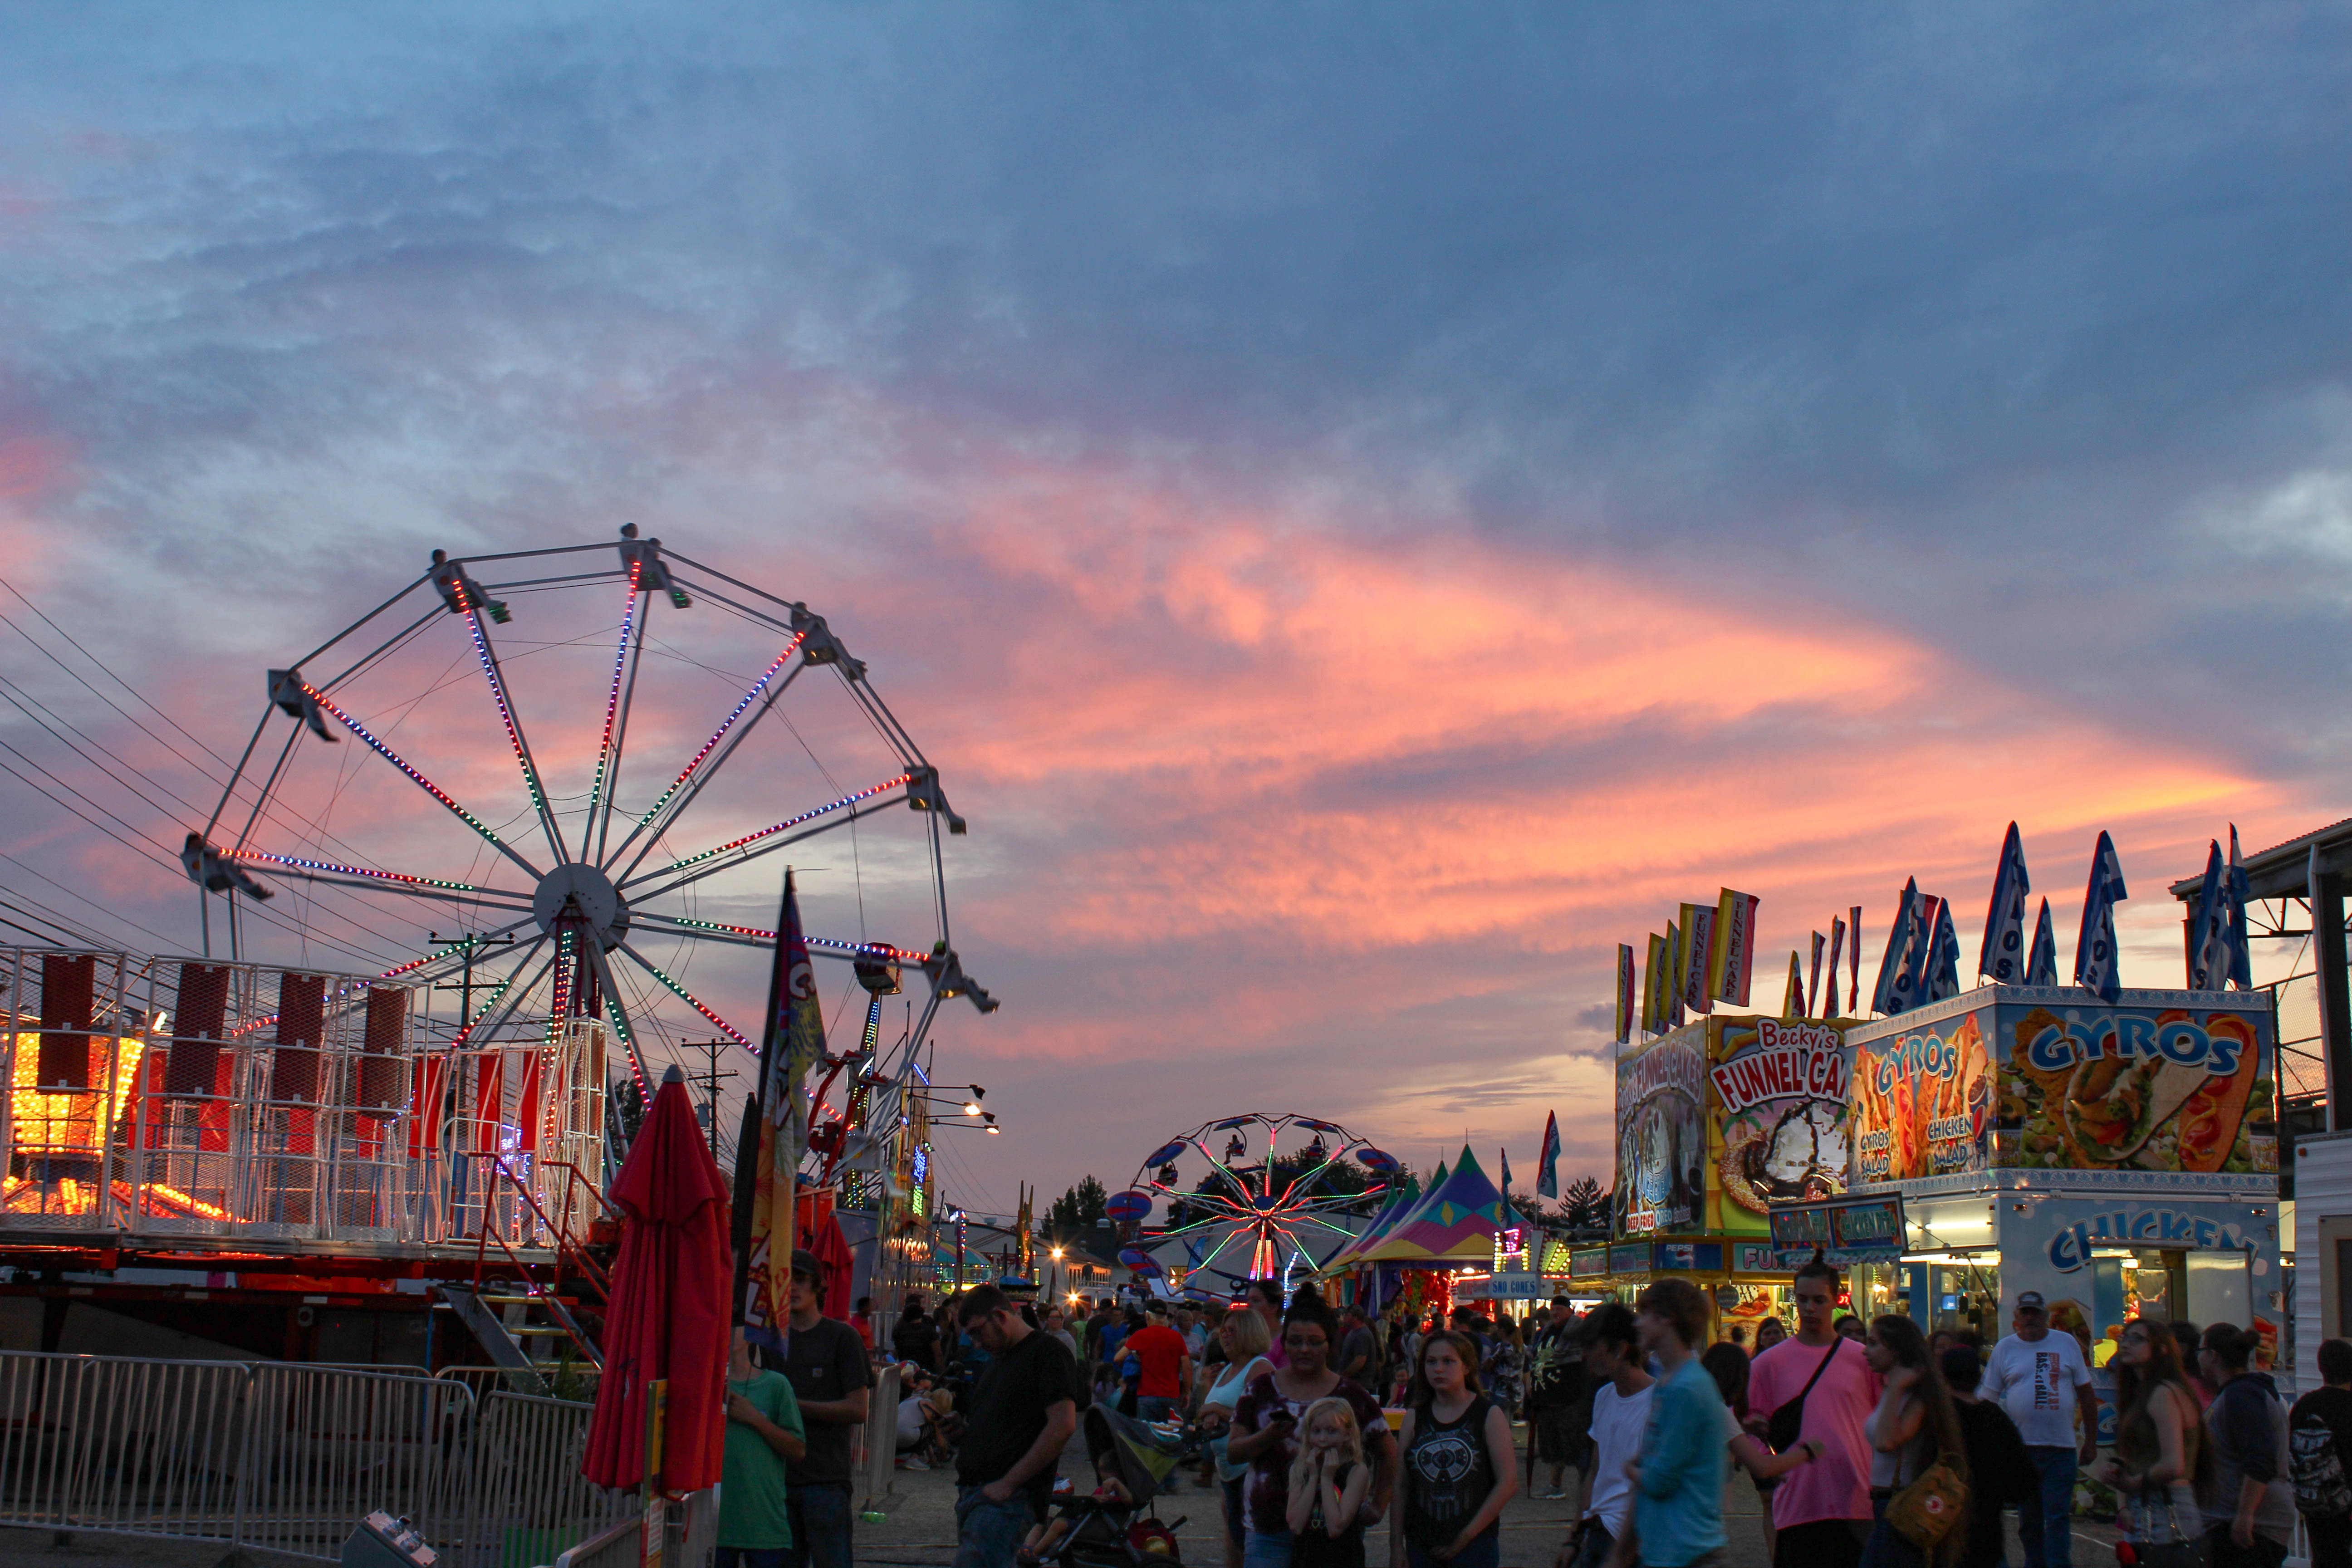 Scenic sunset photo overlooking the Carnival at the Greene County Fair